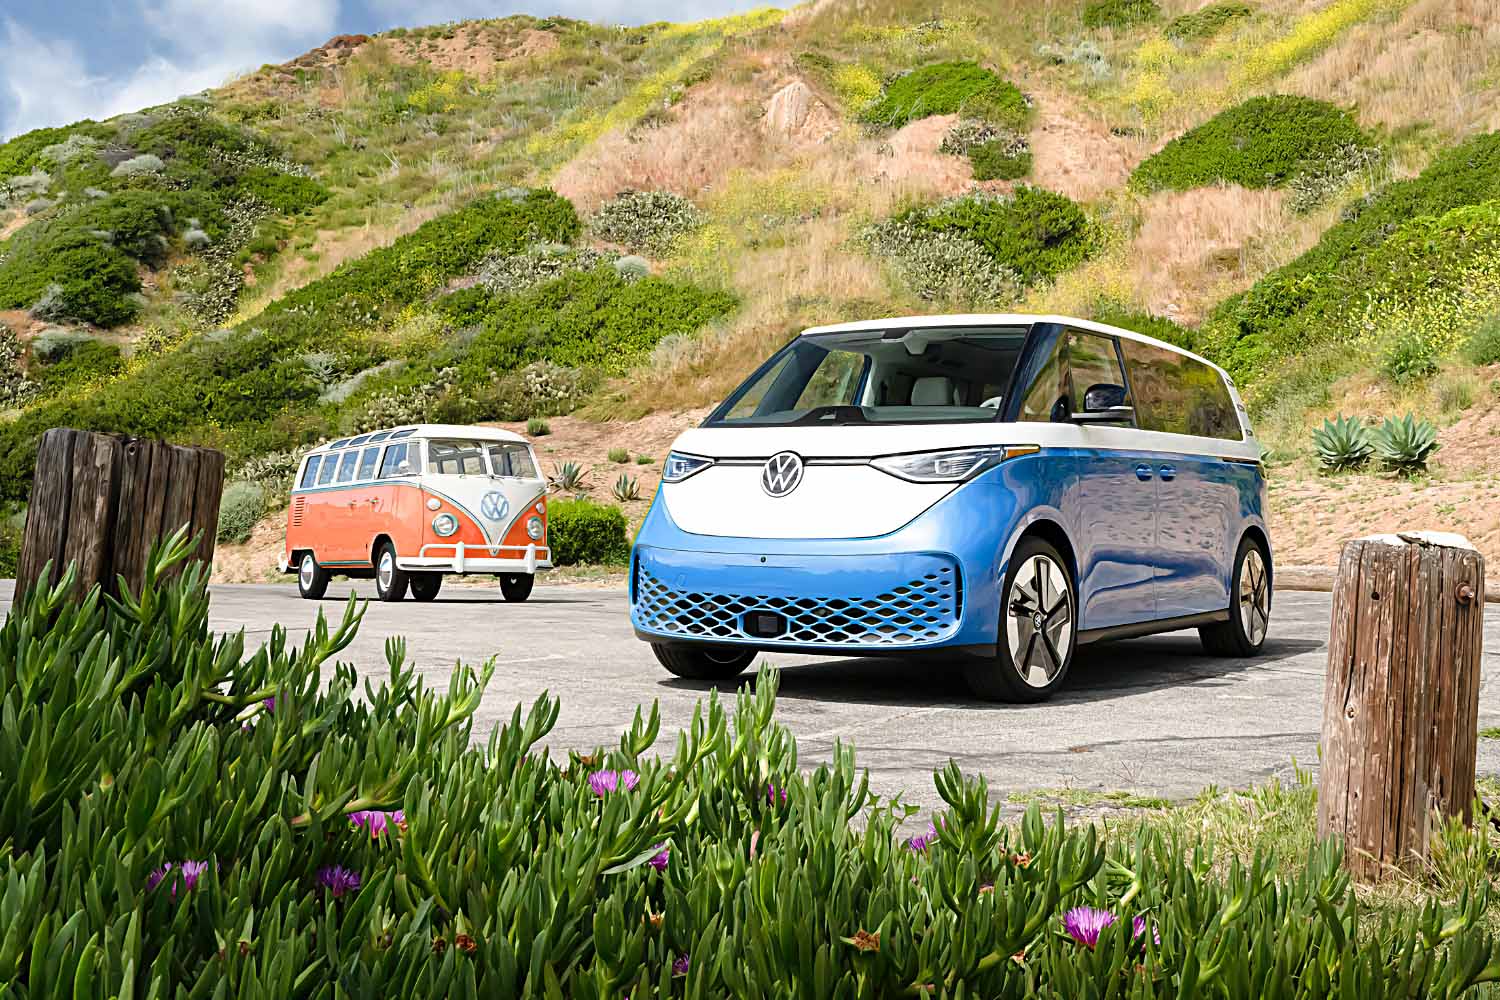 2025 Volkswagen ID. Buzz in blue and white with original midcentury VW Microbus in red and white